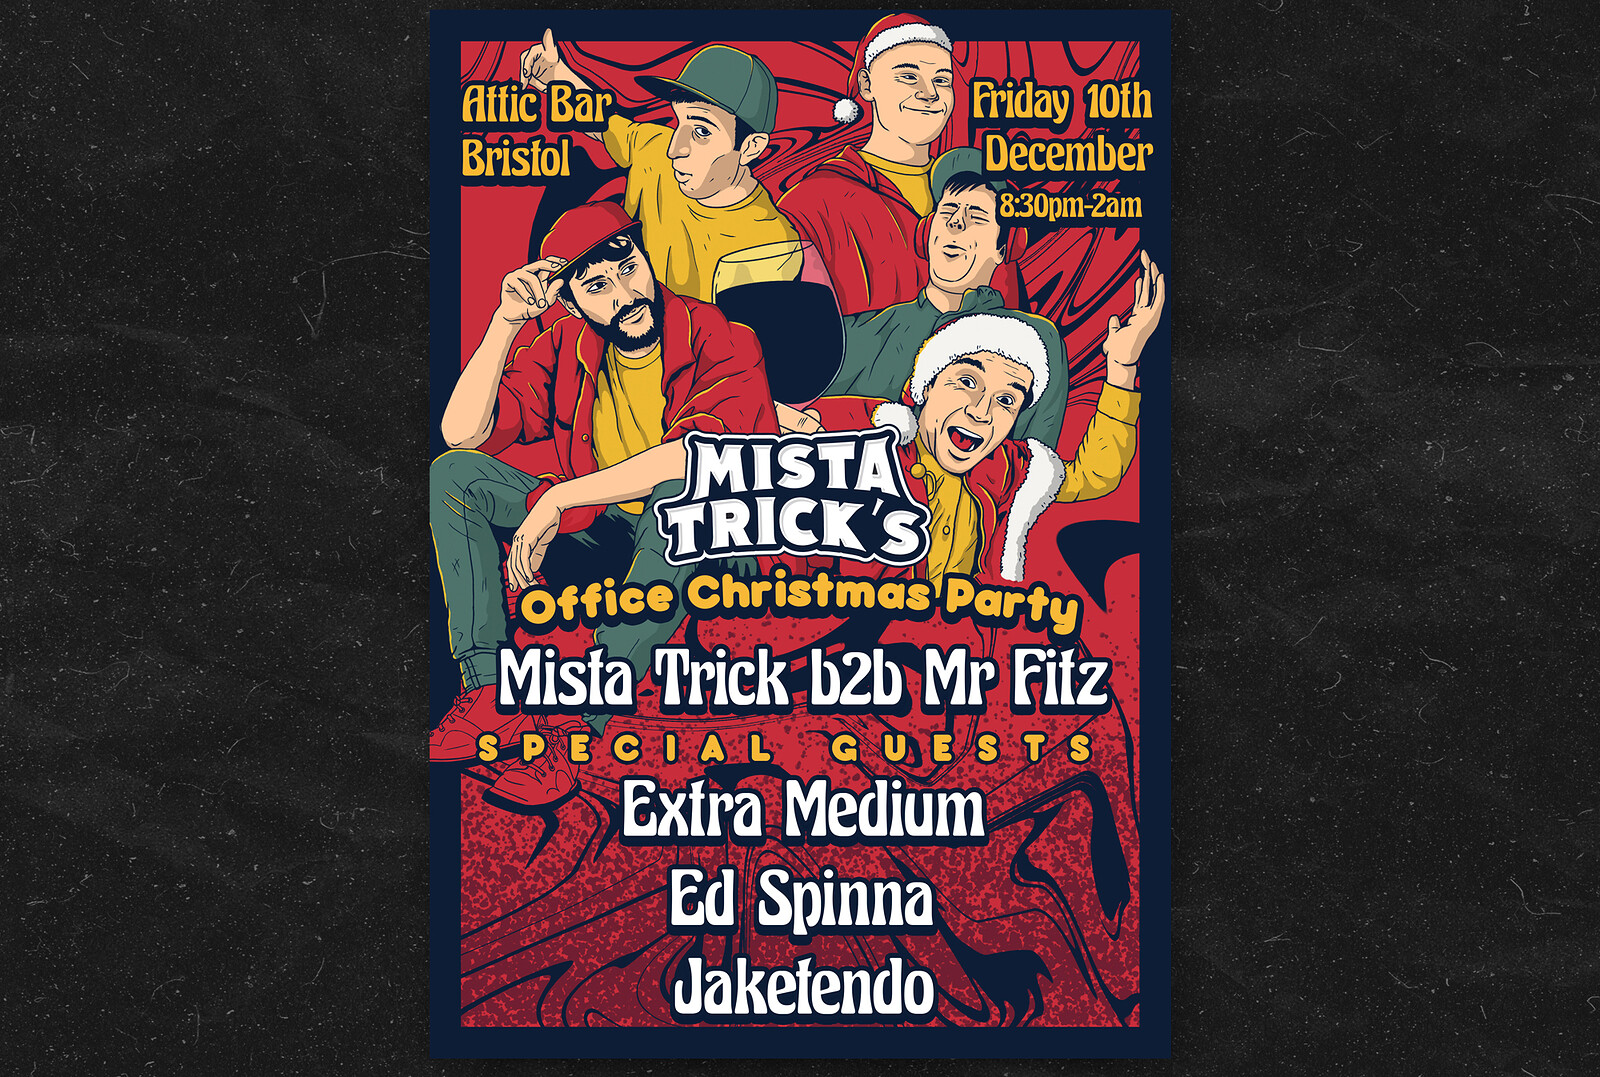 Mista Trick's Office Christmas Party at The Attic Bar